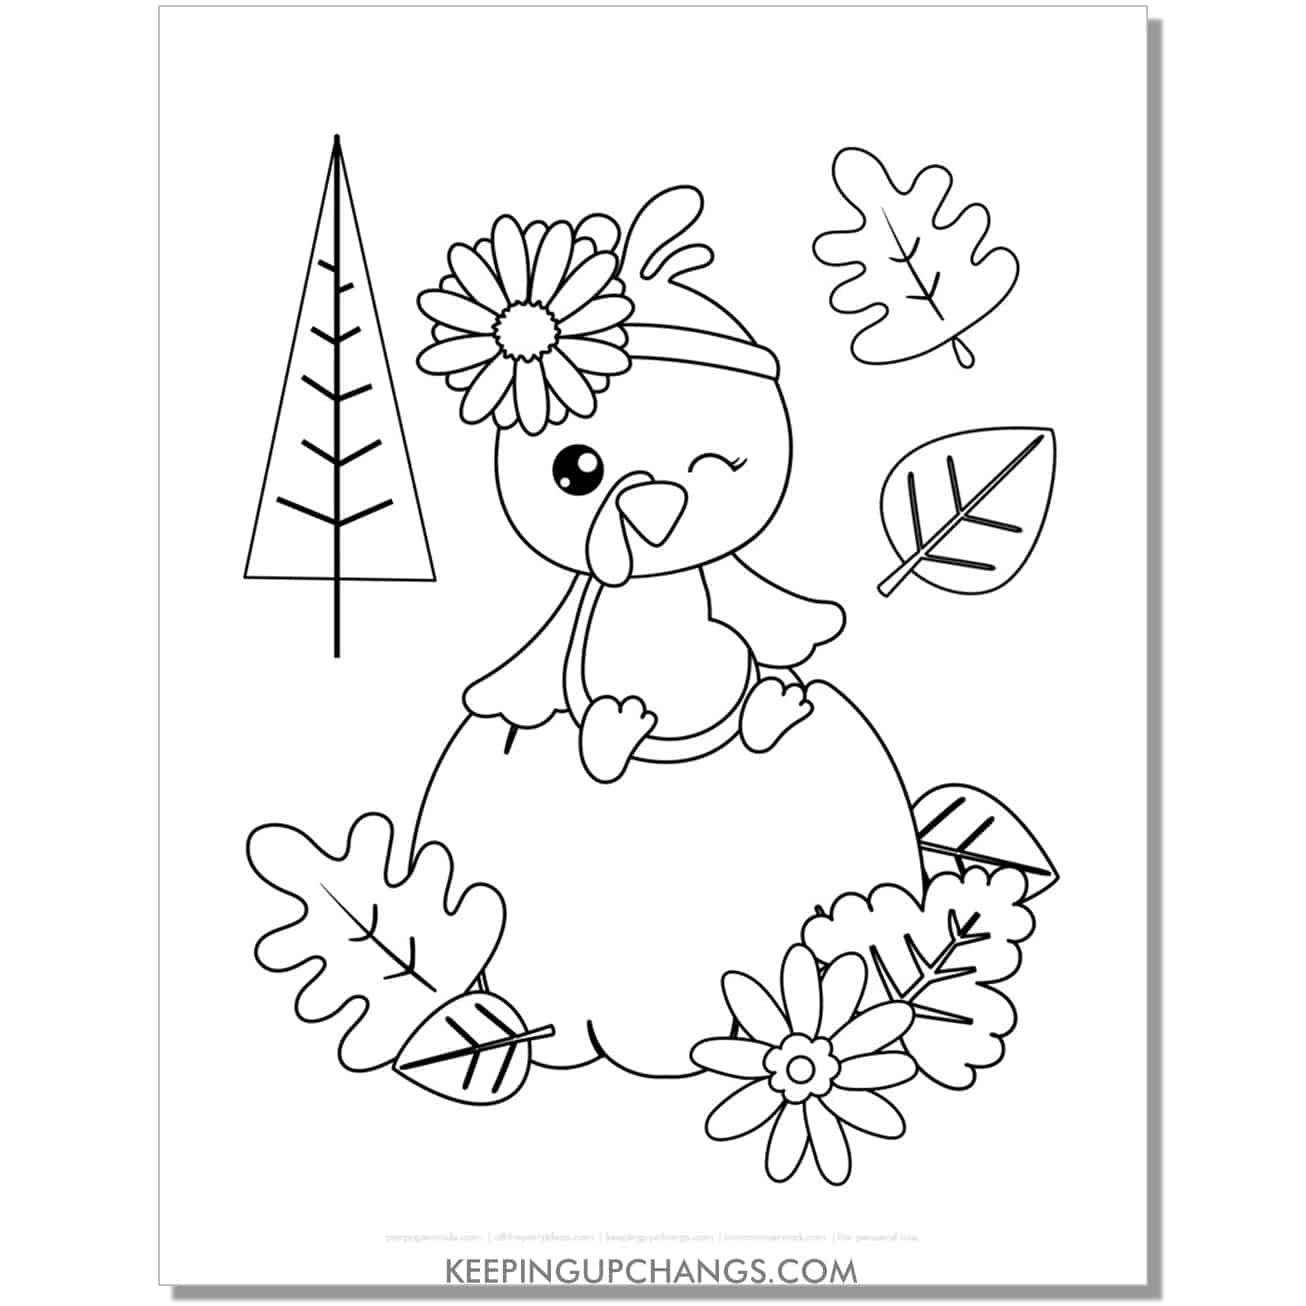 free baby turkey pumpkin coloring page for fall, thanksgiving.